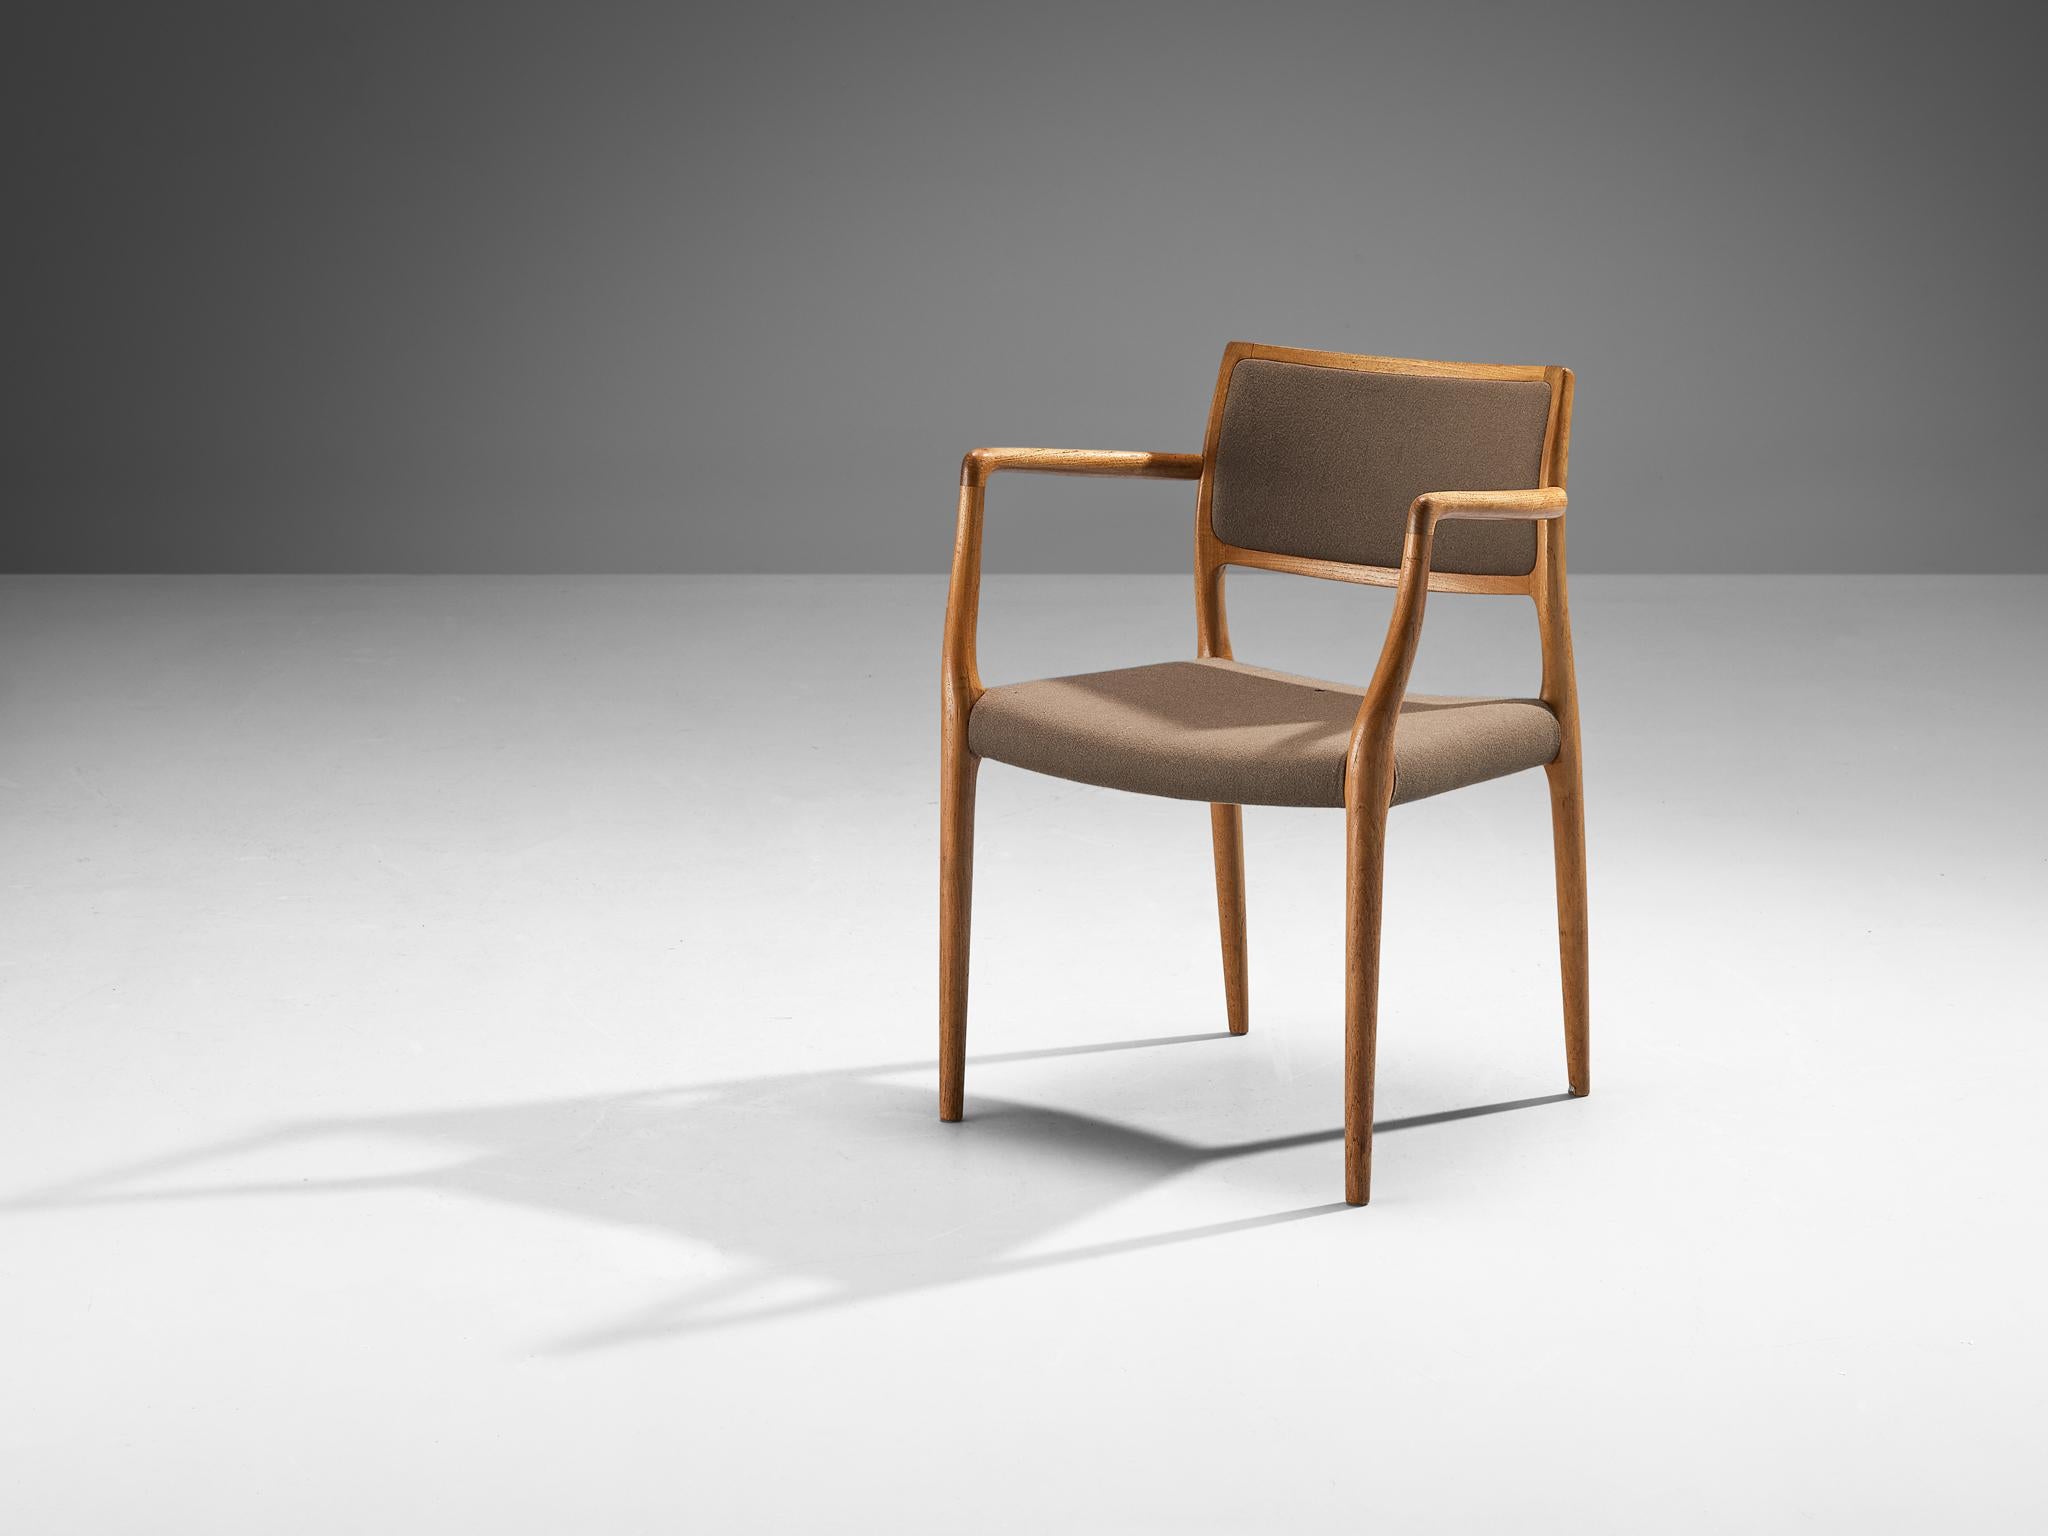 Niels Otto Møller for J. L. Møller, hair model 56, in teak and green fabric, Denmark, 1954. 
 
This chair shows subtle lines and beautiful curves of the woodwork. In the highly refined connections of the wood you can see the work of an expert, a